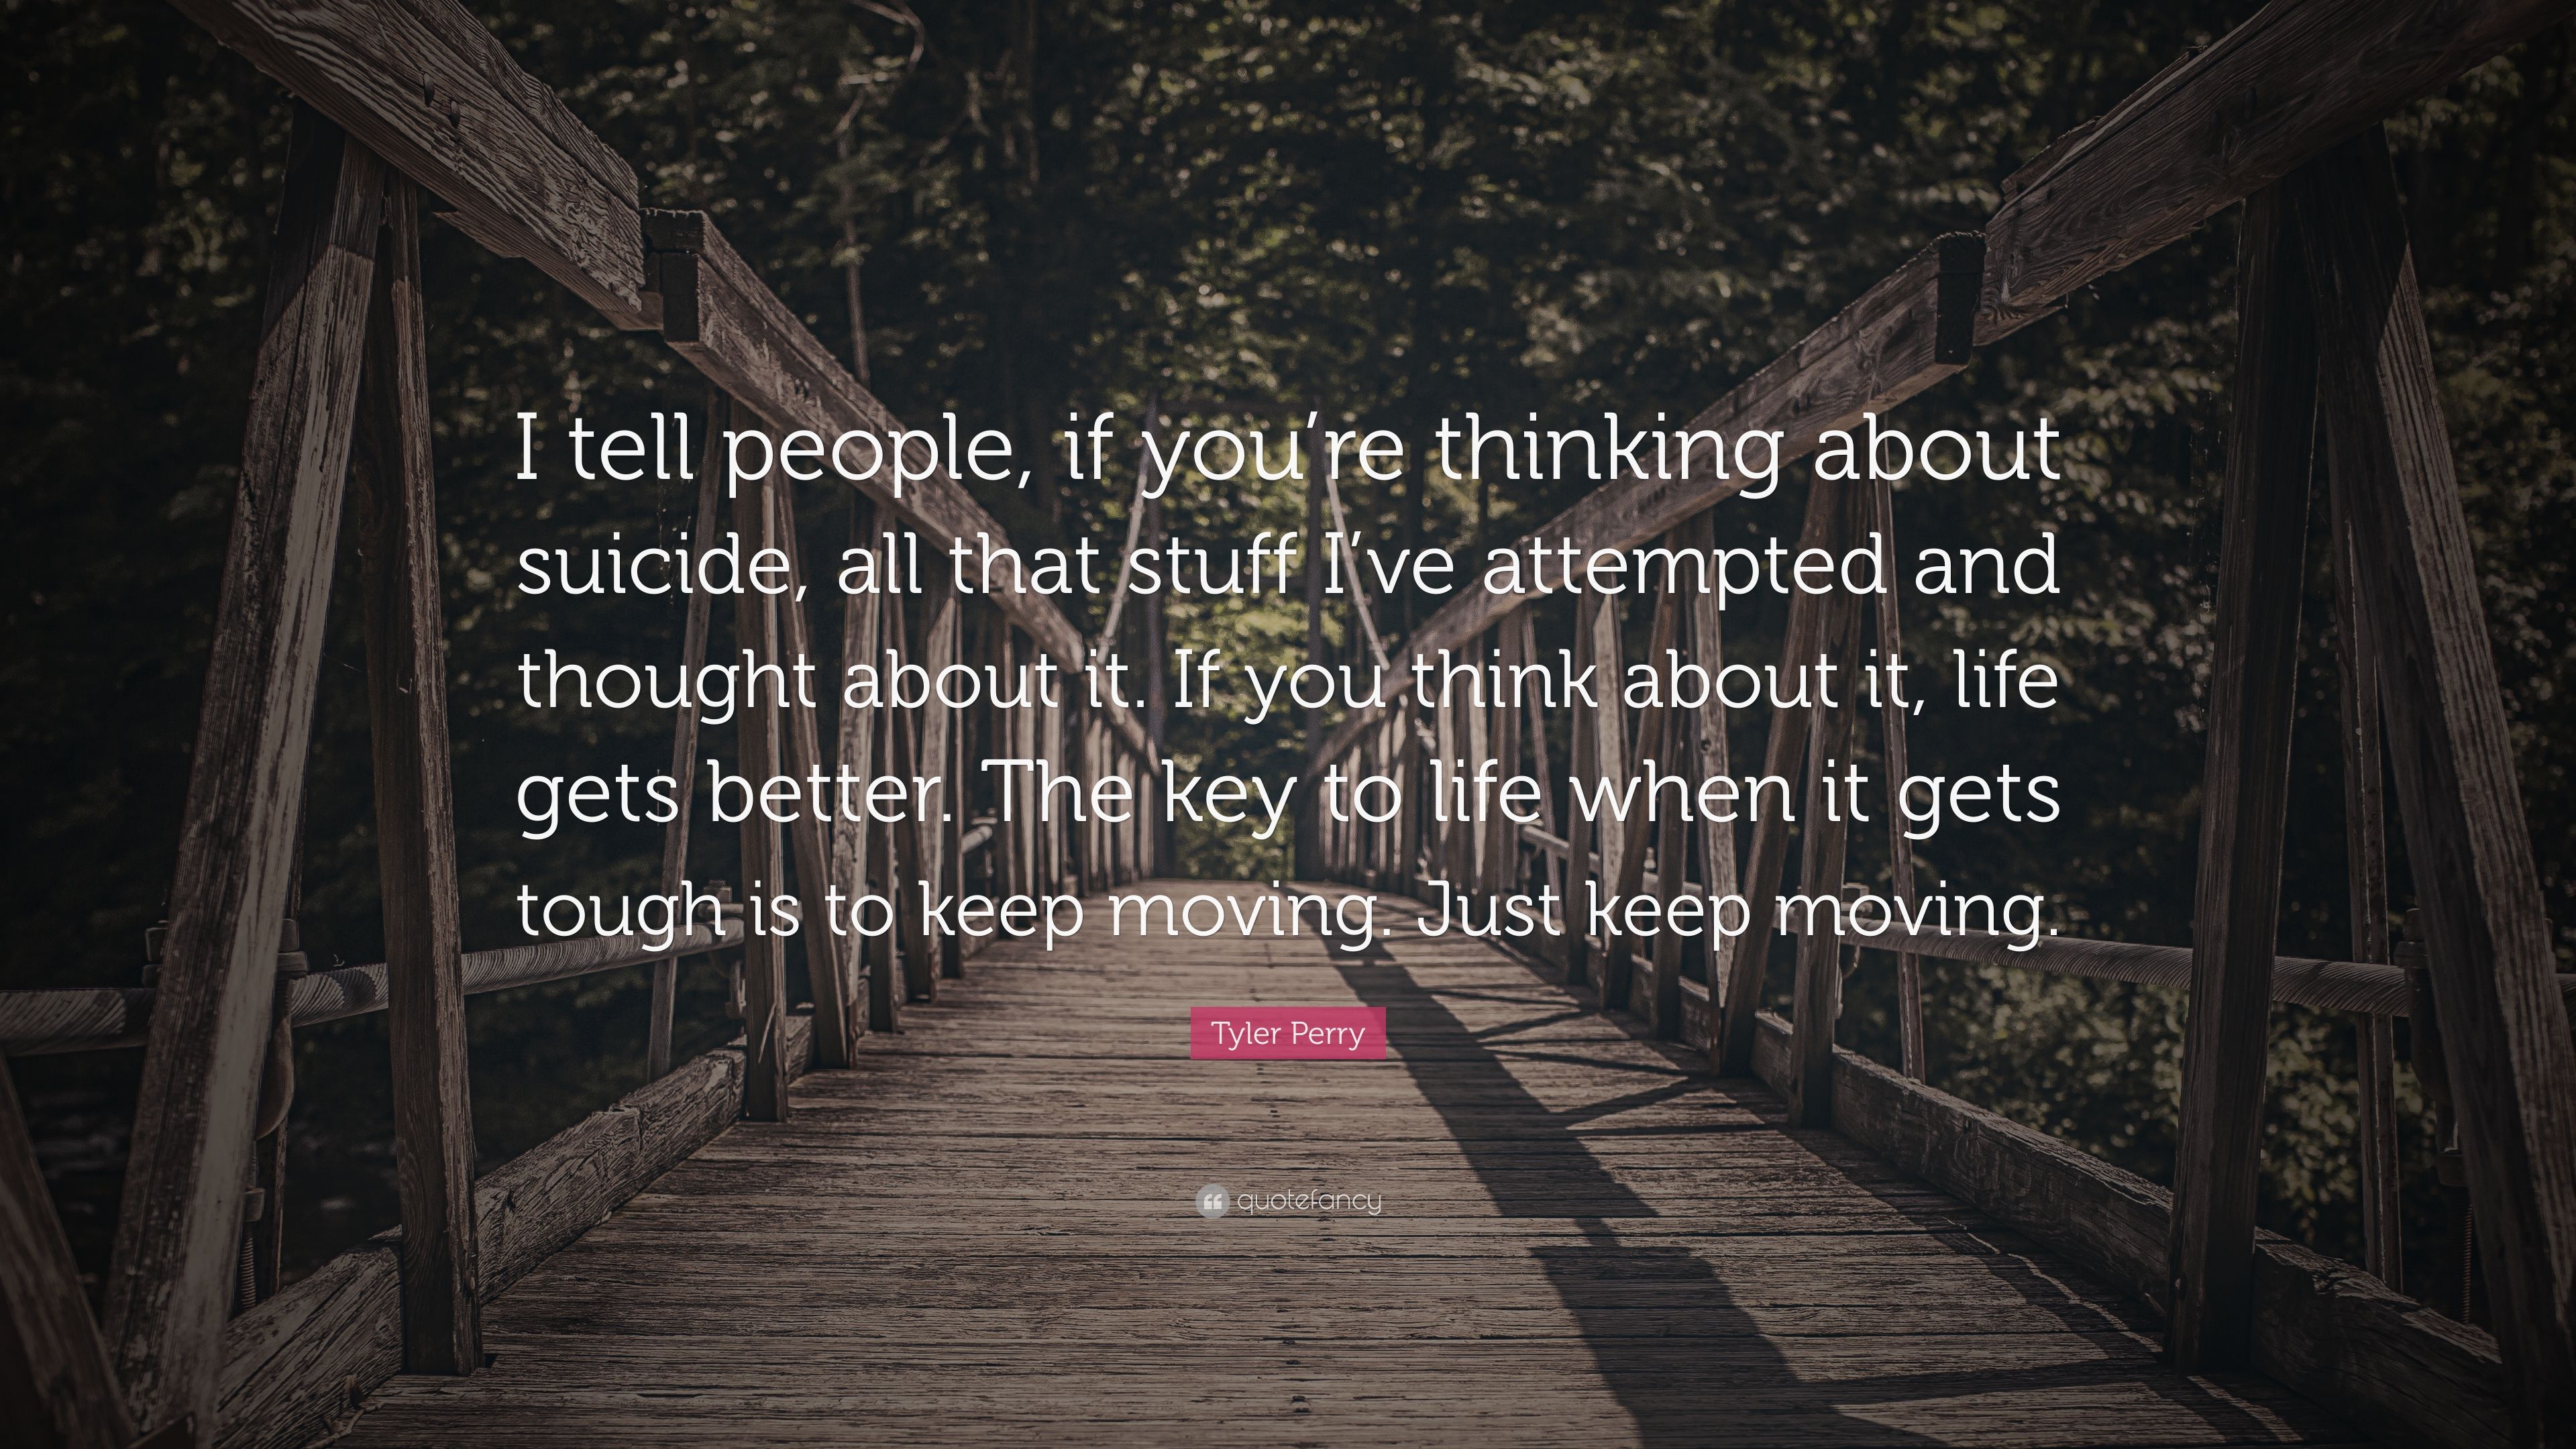 Tyler Perry Quote: “I tell people, if you're thinking about suicide